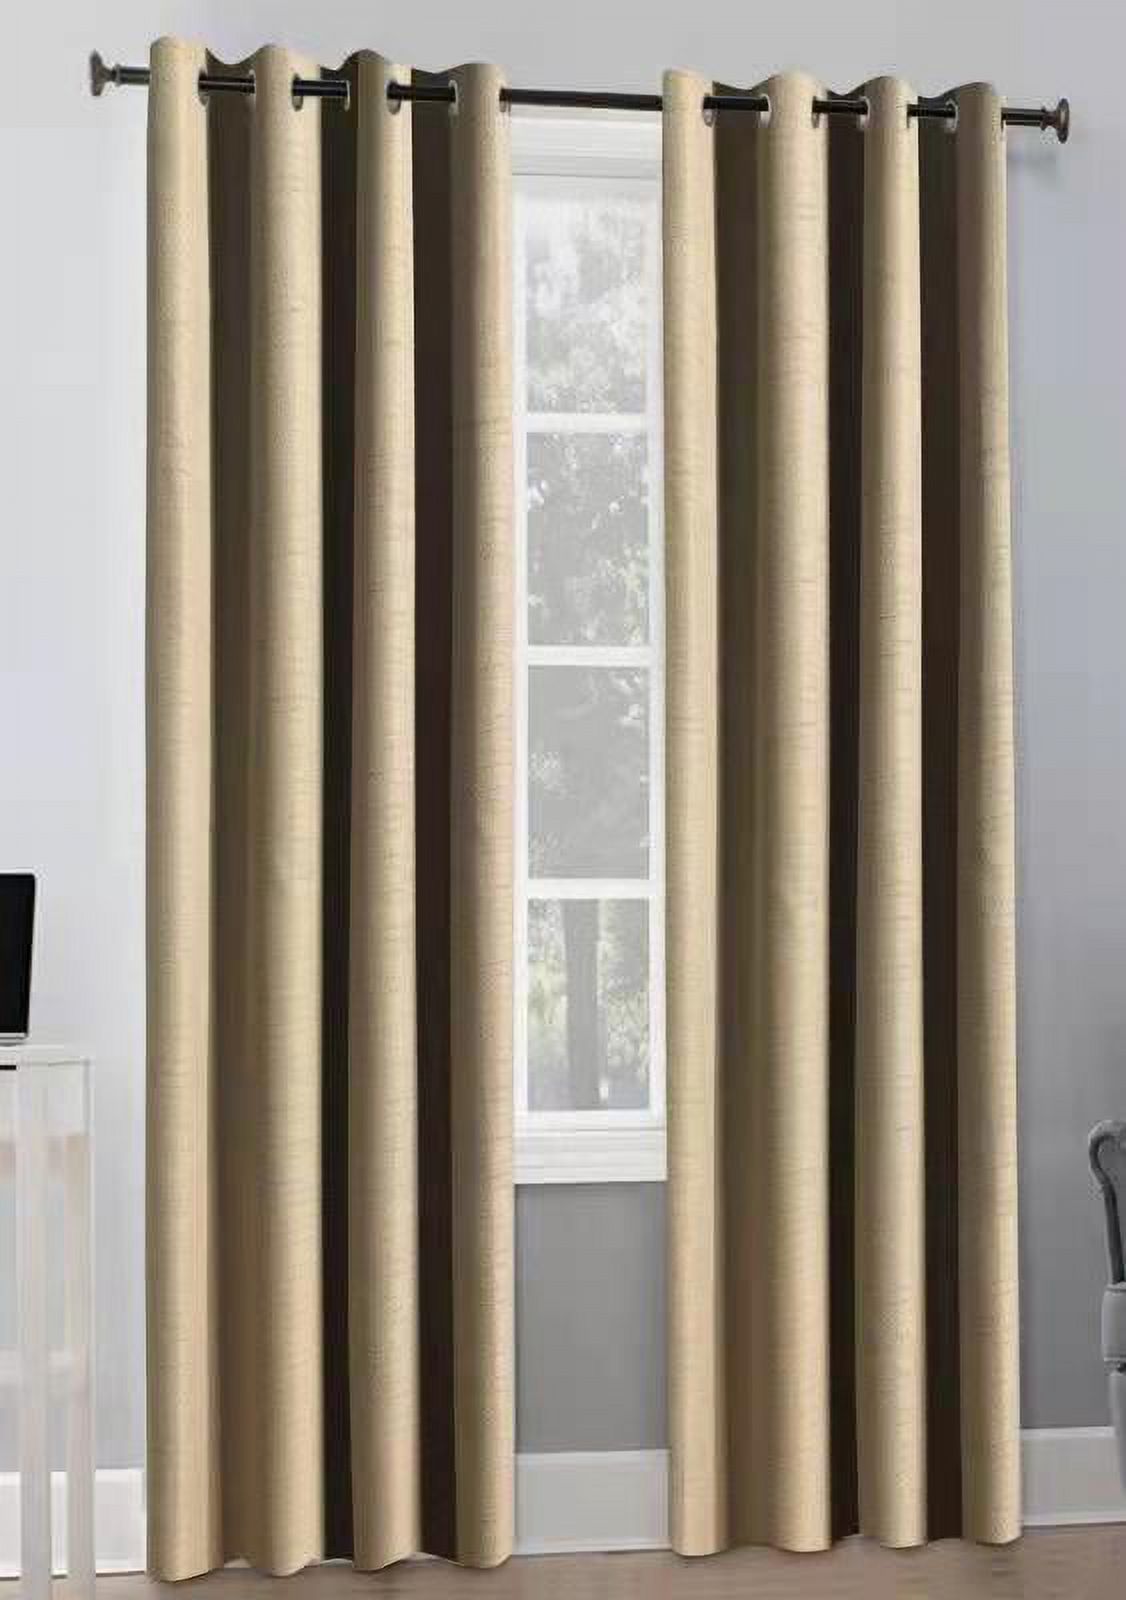 Better Homes & Gardens Basketweave Curtain Panel, 50" x 84", Beige - image 4 of 6